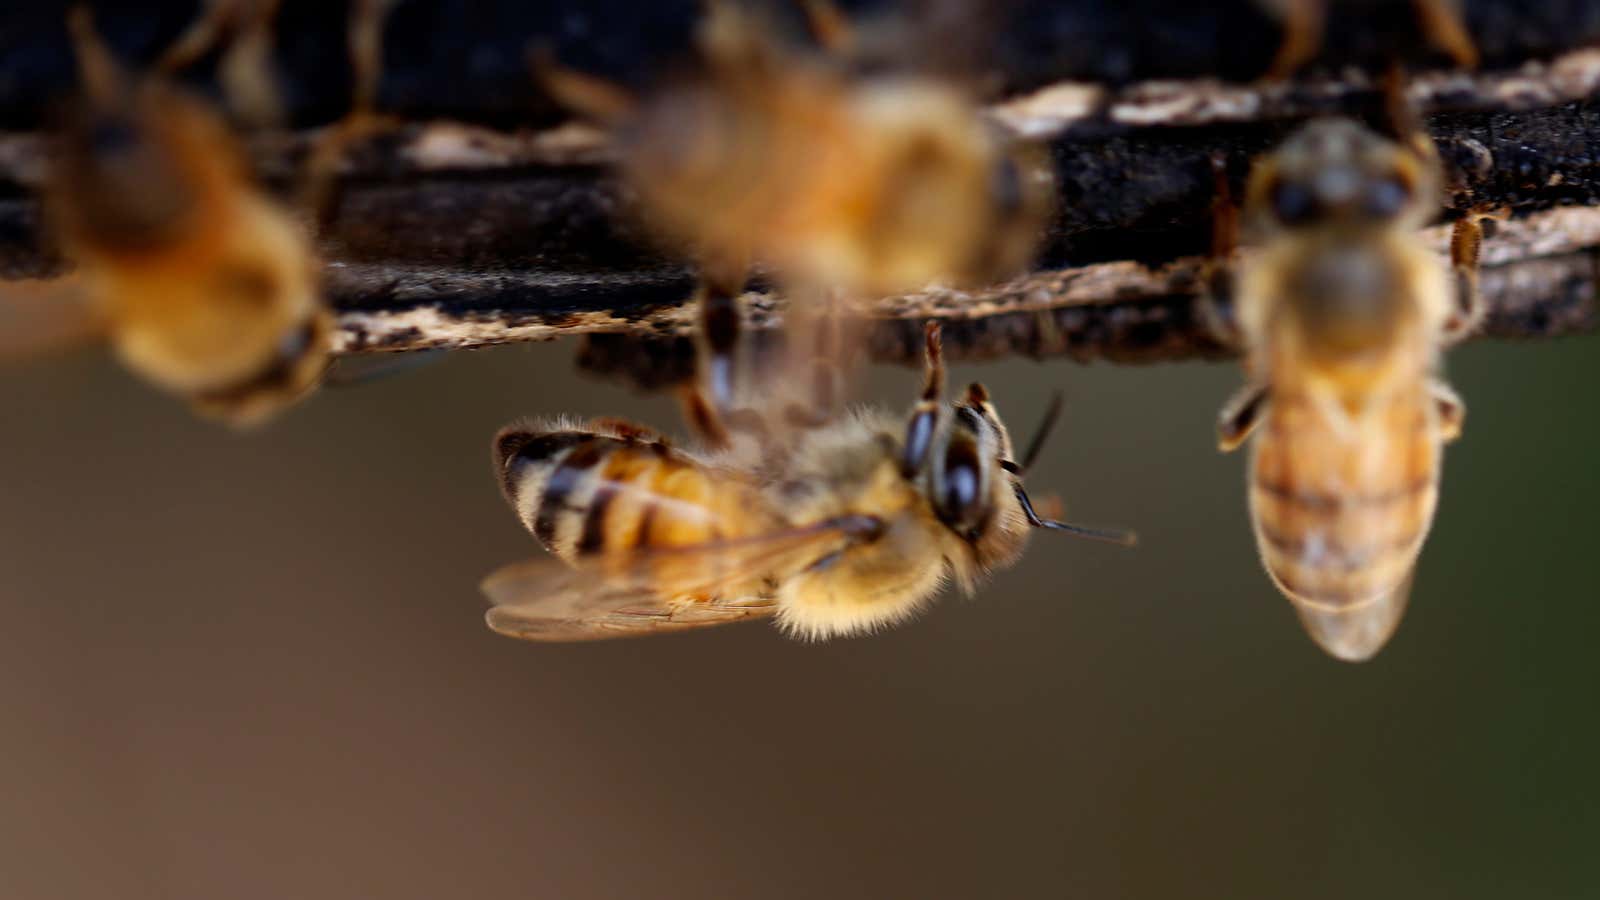 Sulfoxaflor impairs bees’ ability to reproduce.